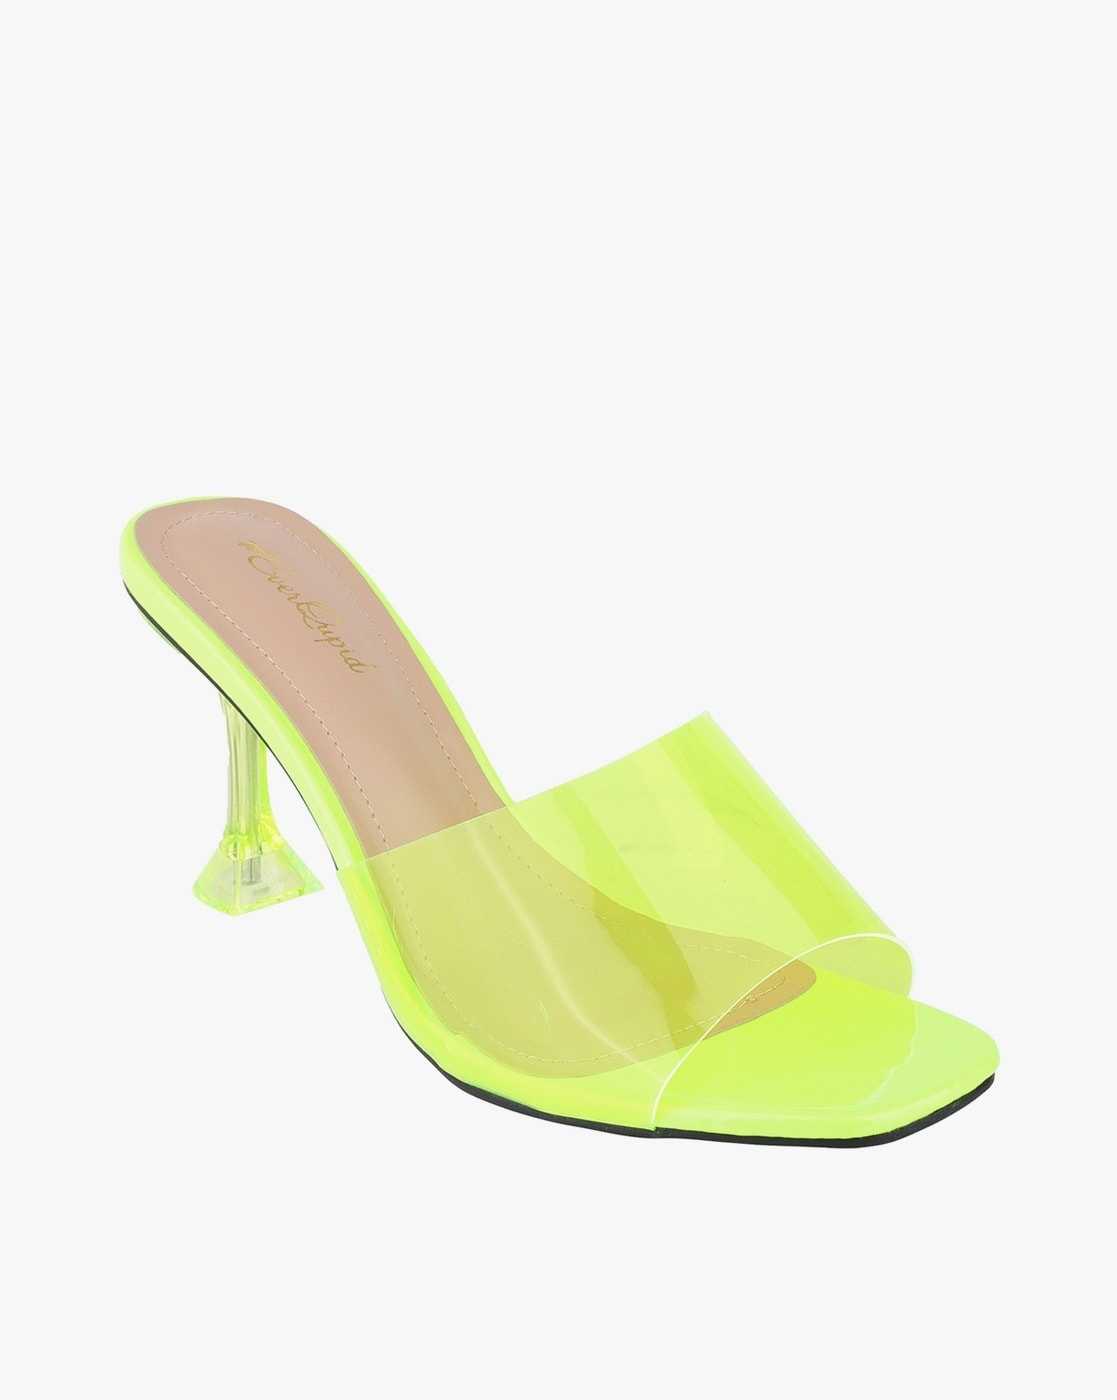 Free People Neon Yellow Transparent Sandals Heels Shoes Square Toe | eBay